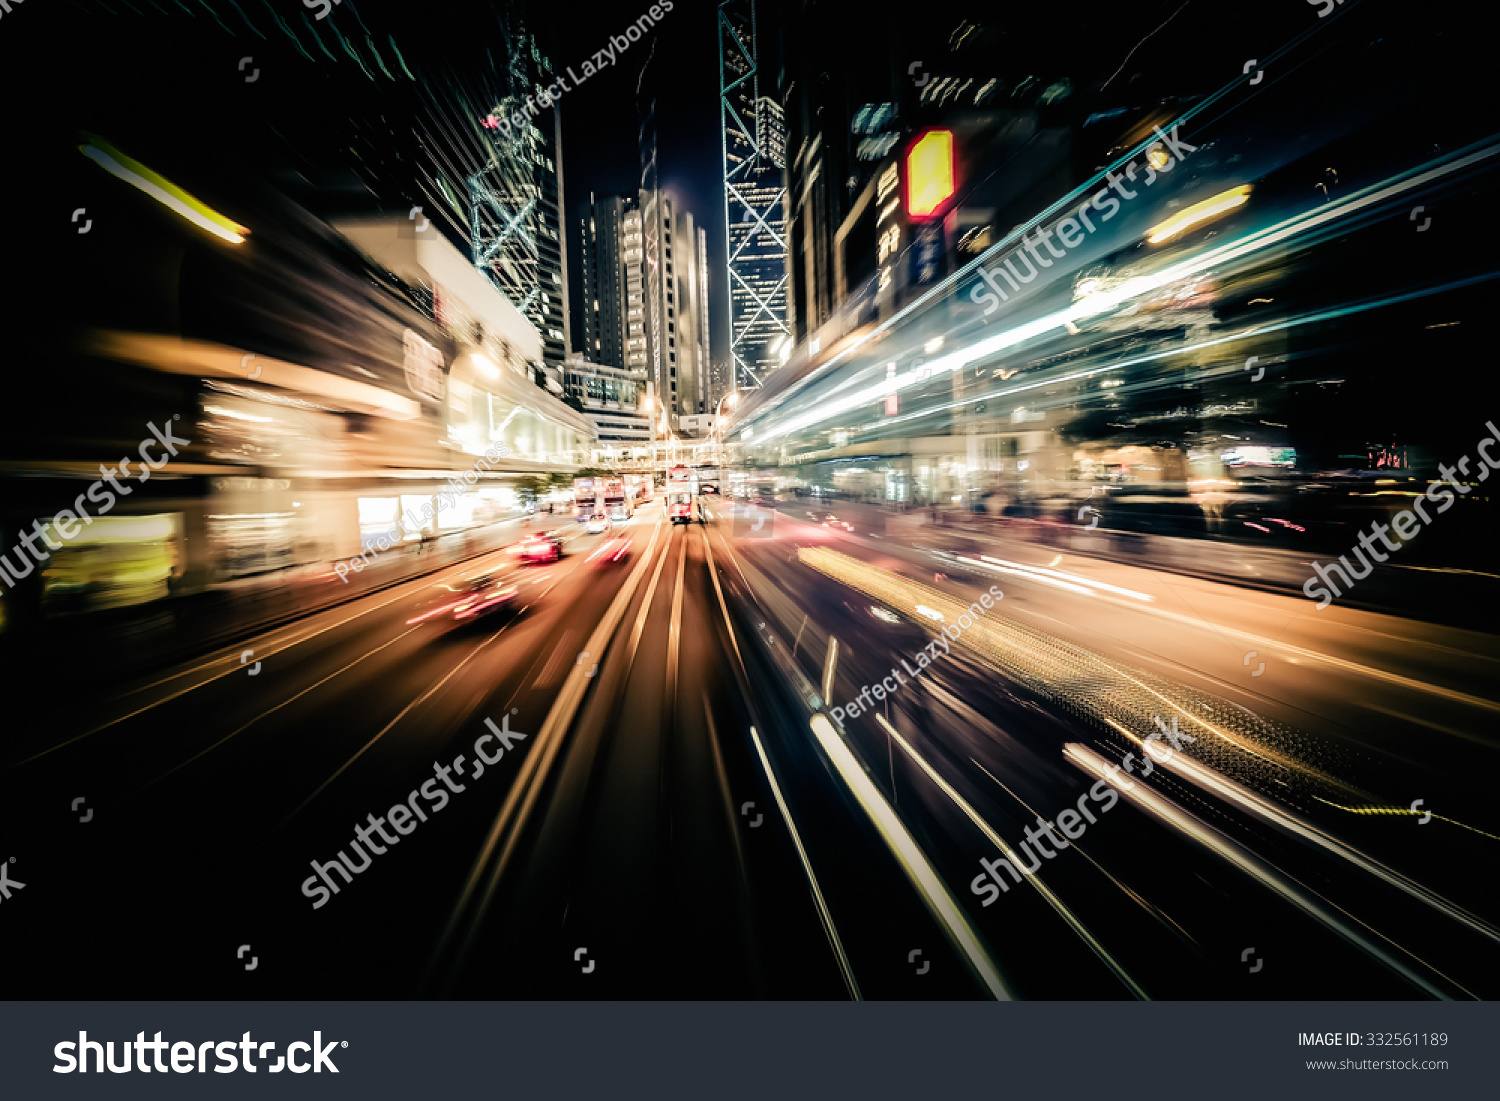 Abstract cityscape traffic background with motion blur, art toning. Moving through modern city street with  illuminated skyscrapers. Hong Kong #332561189